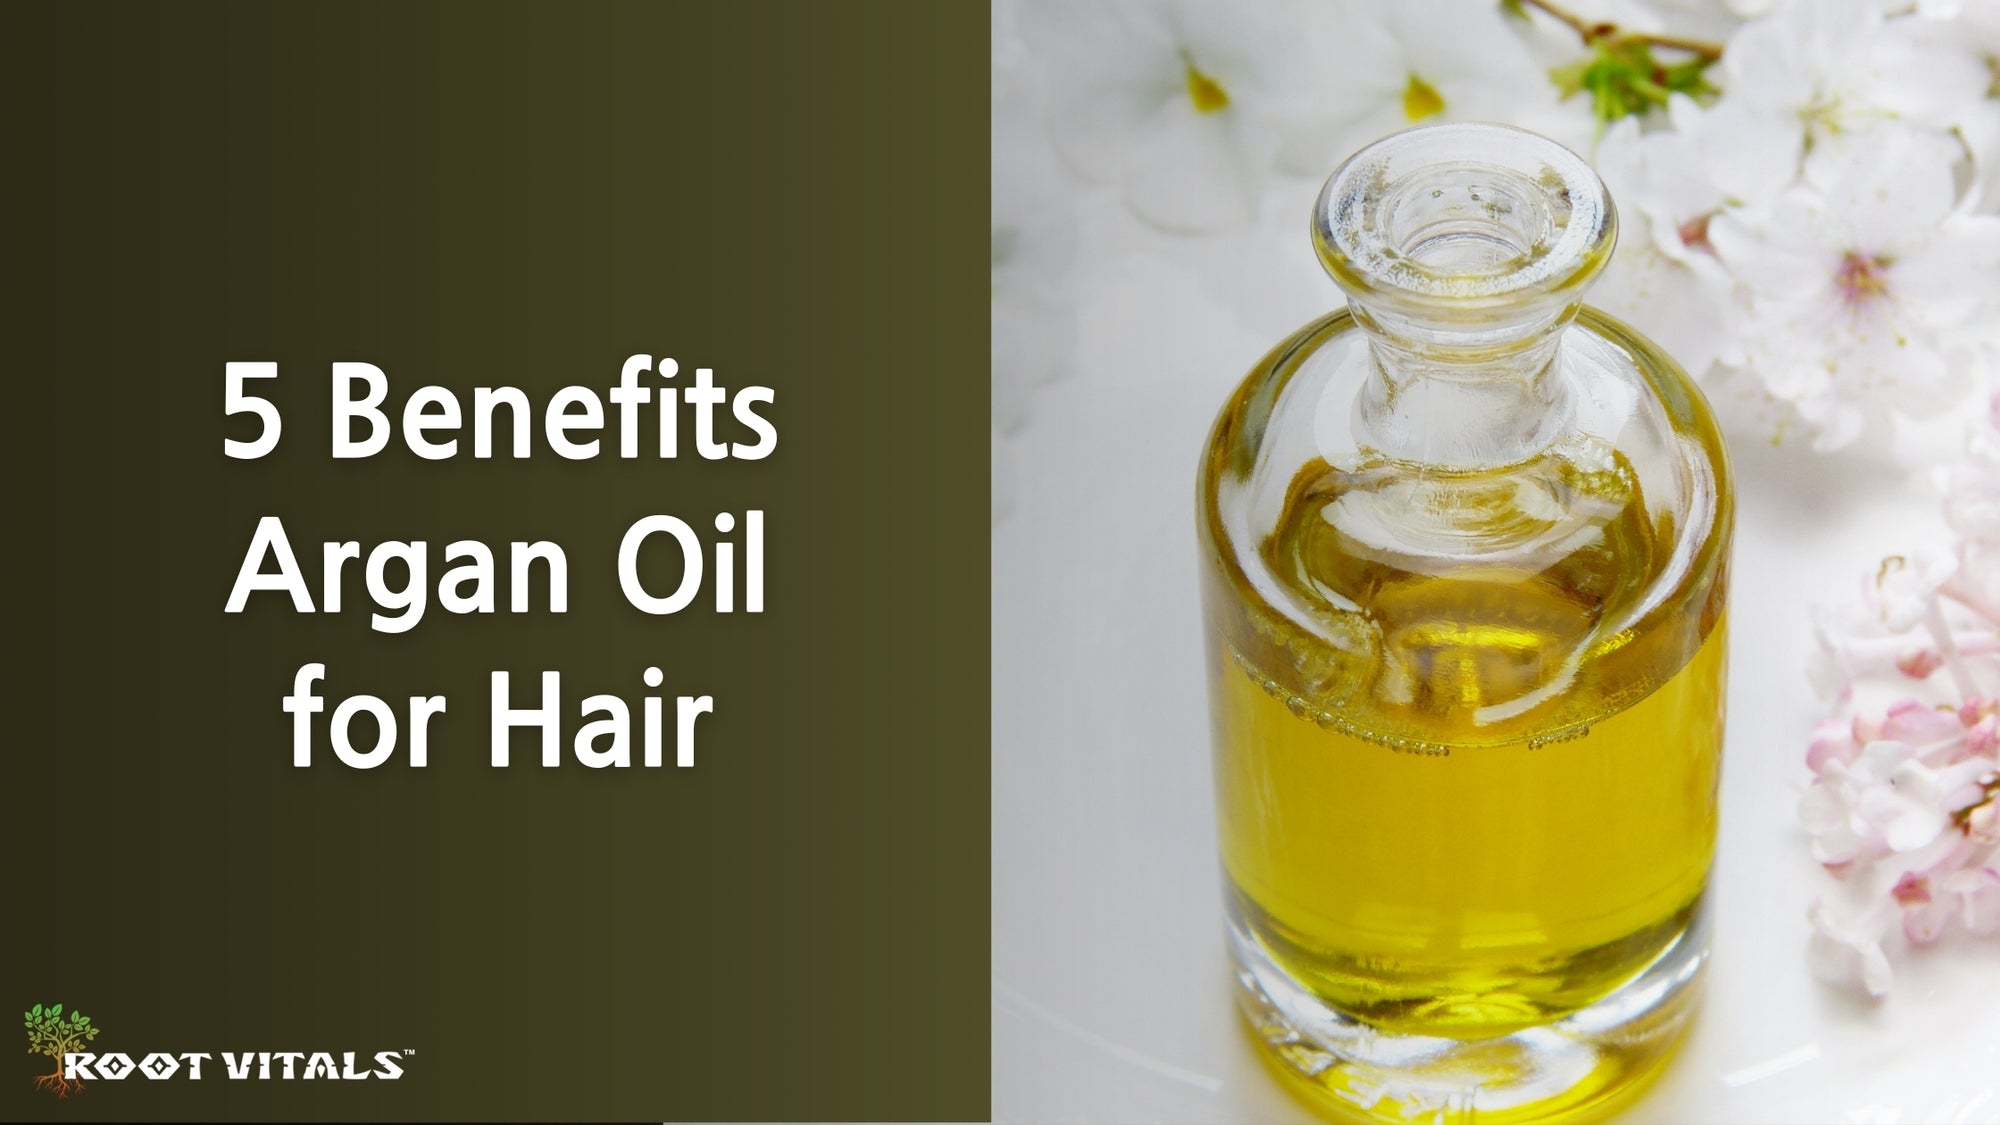 Argan oil for hair benefits to help hair grow strong and healthy